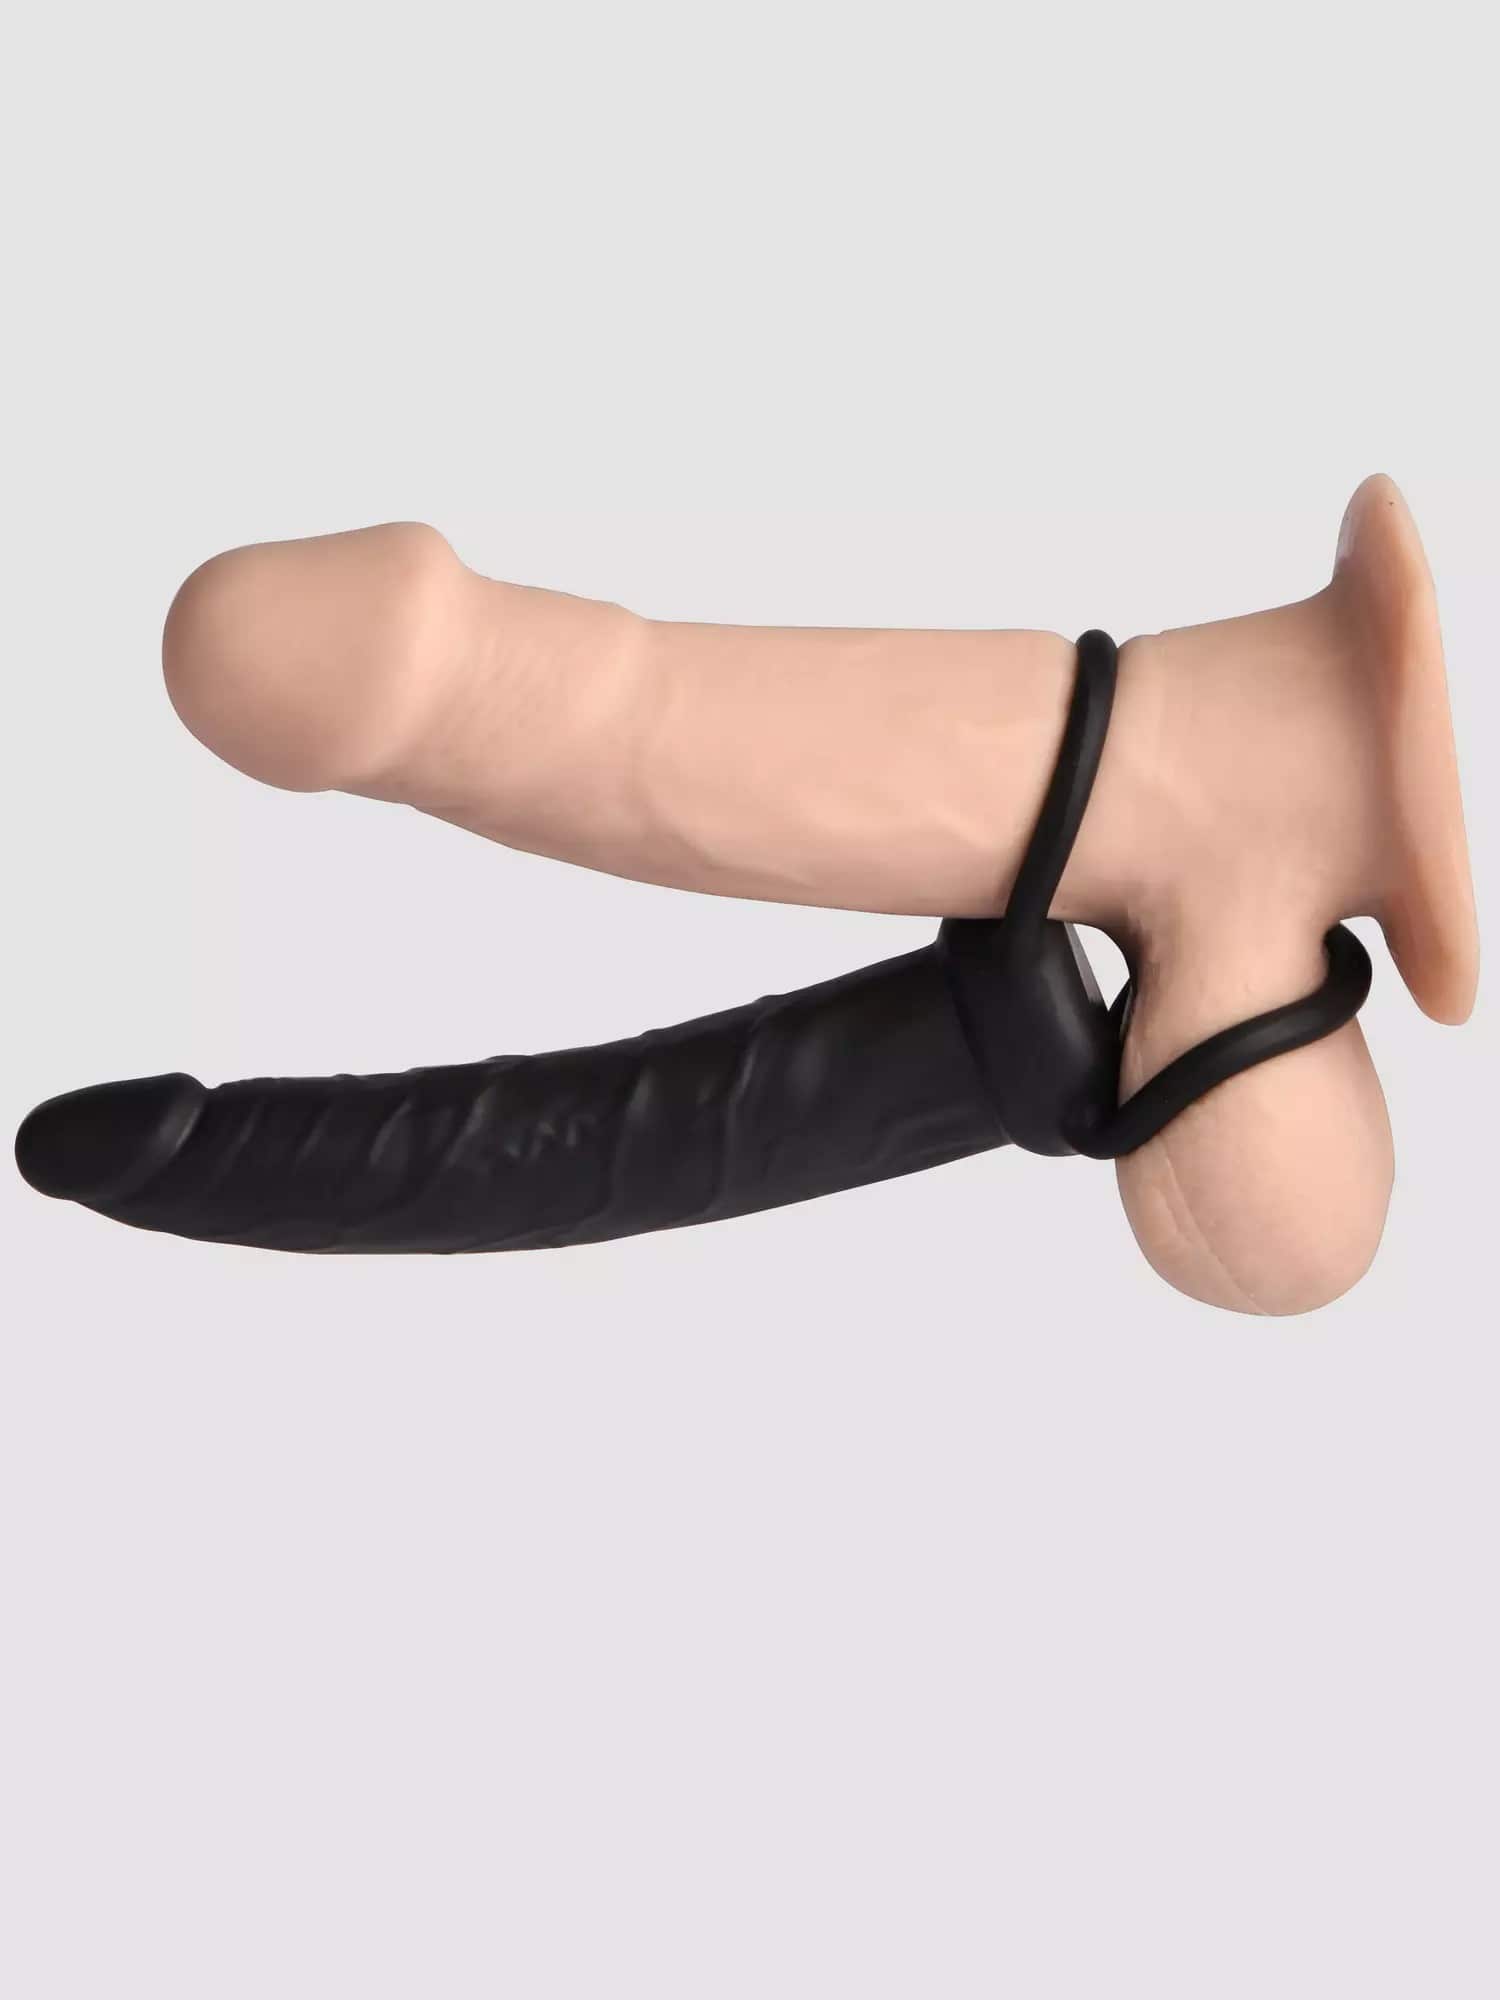 The 9 Best Double Penetration Strap-Ons and Cock Rings 